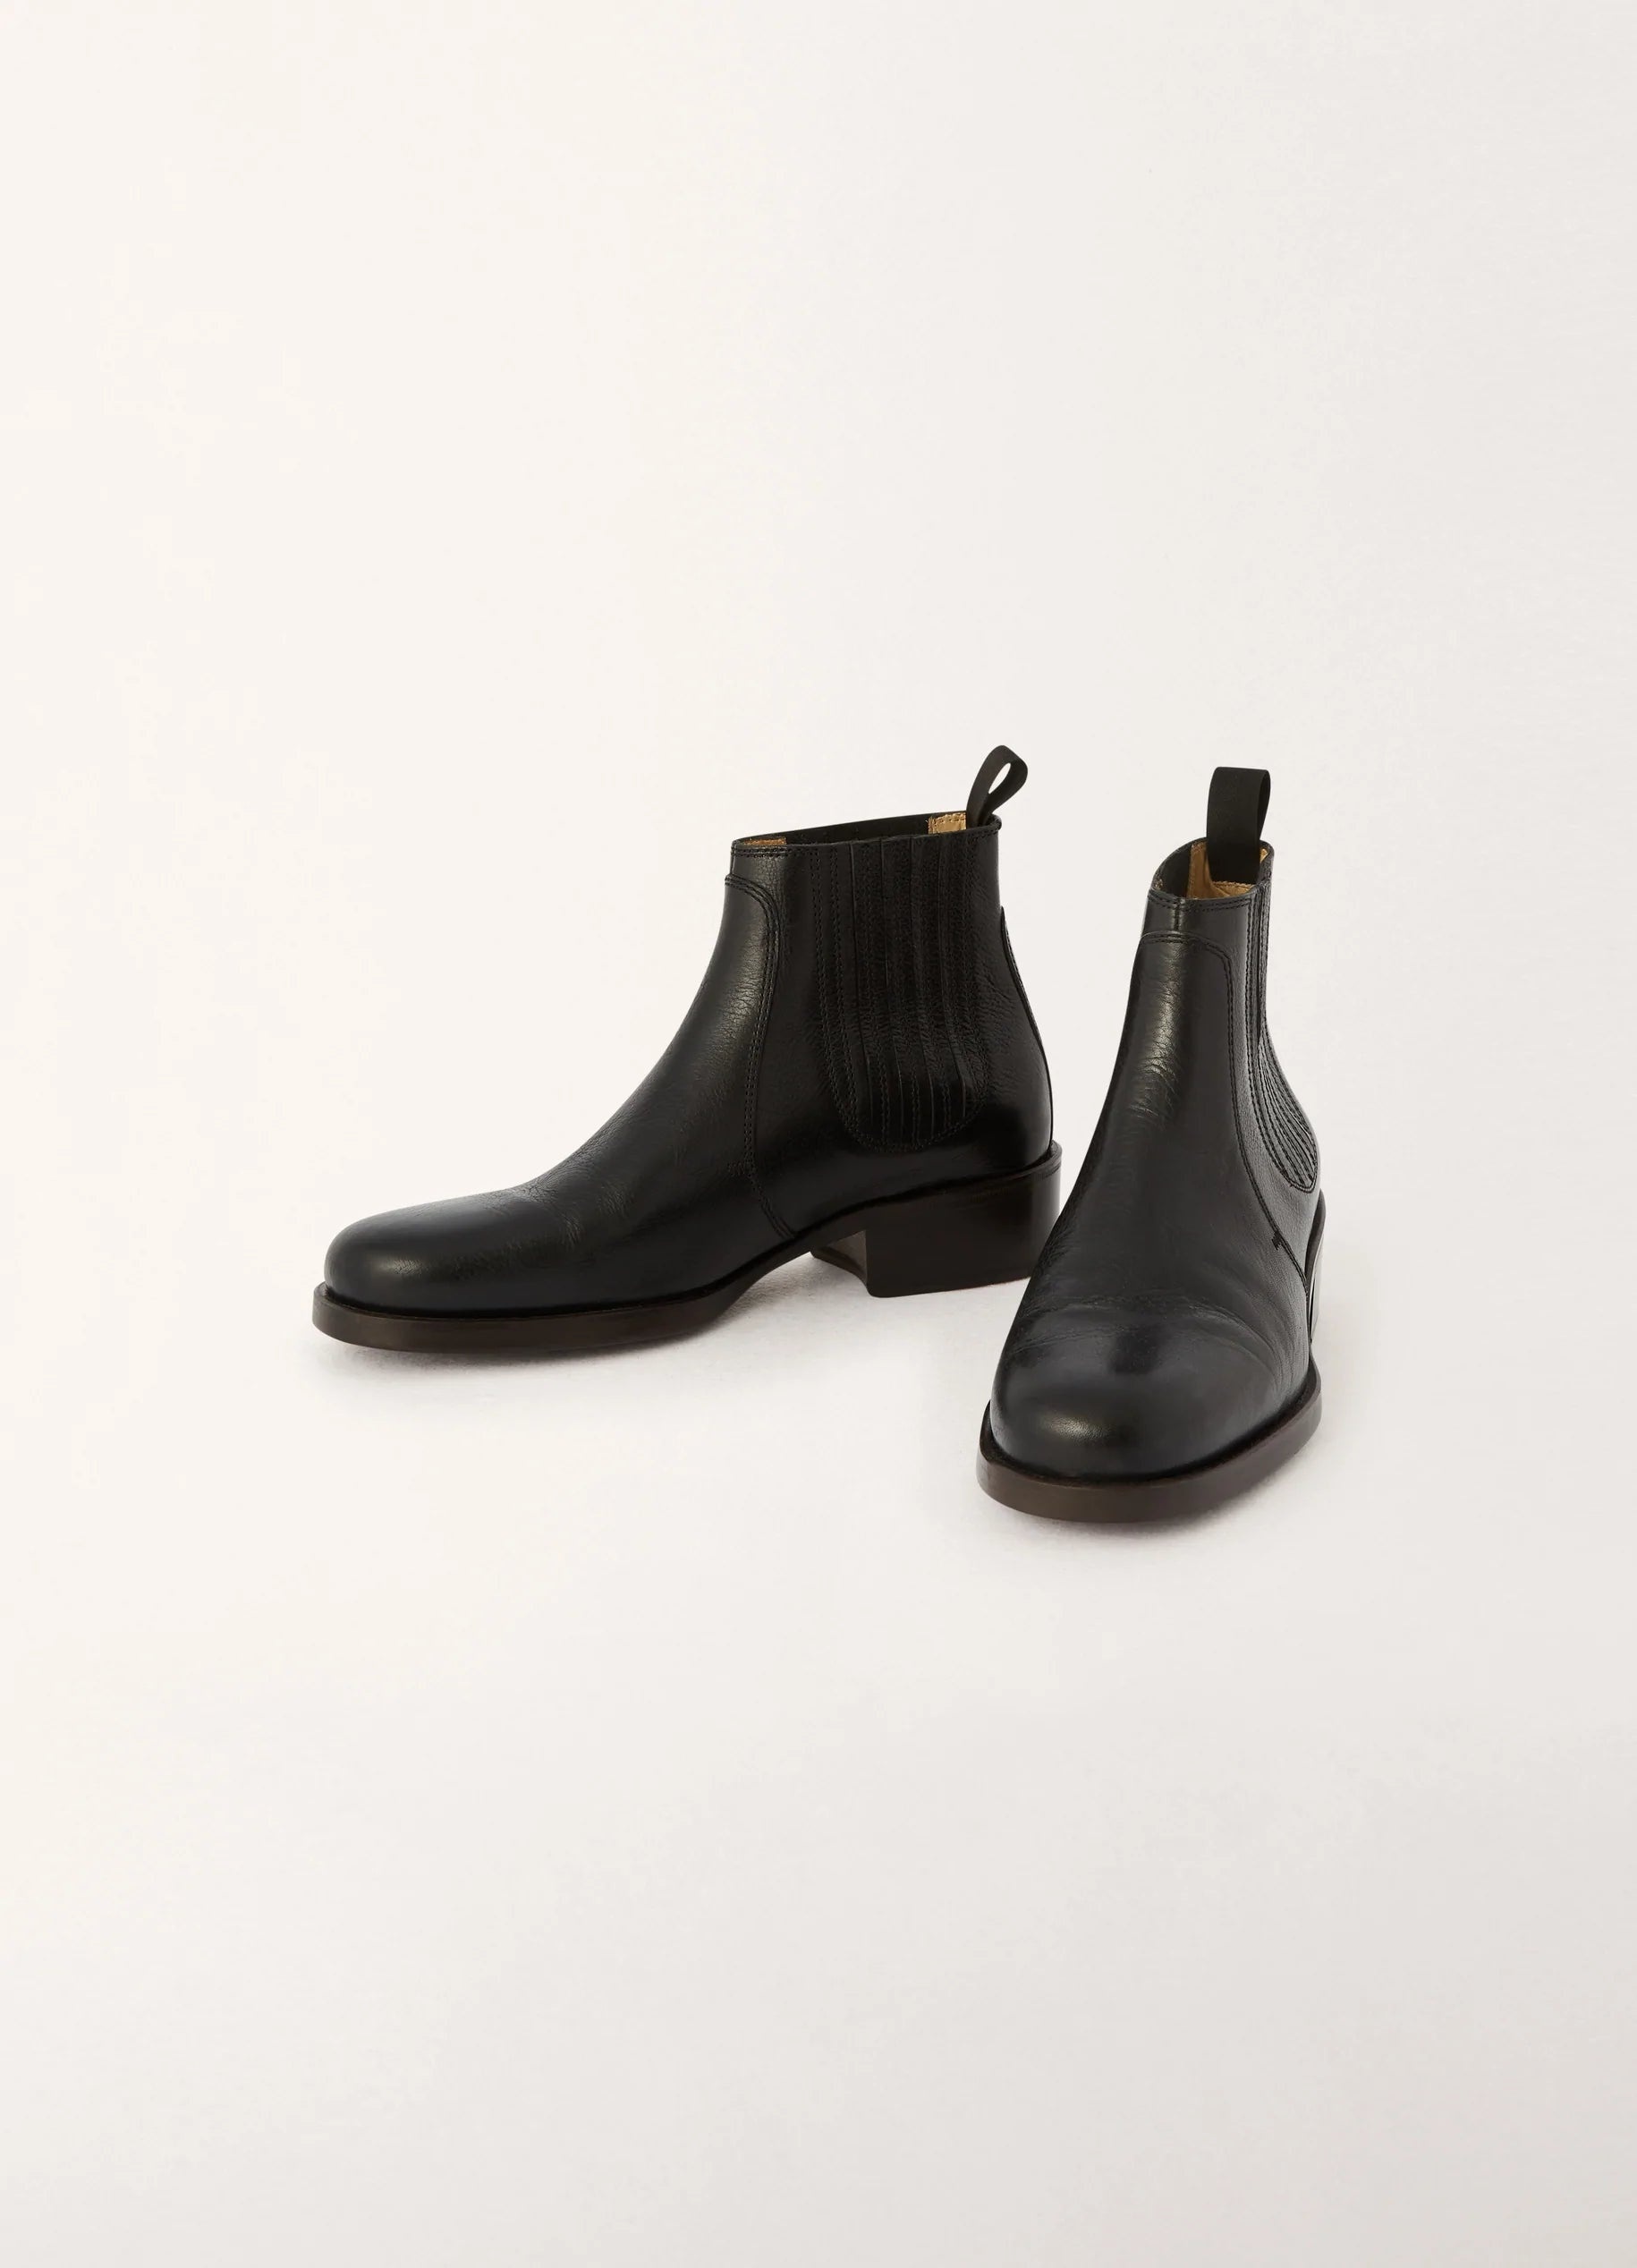 CHELSEA BOOTS
SOFT VEGETABLE - 2